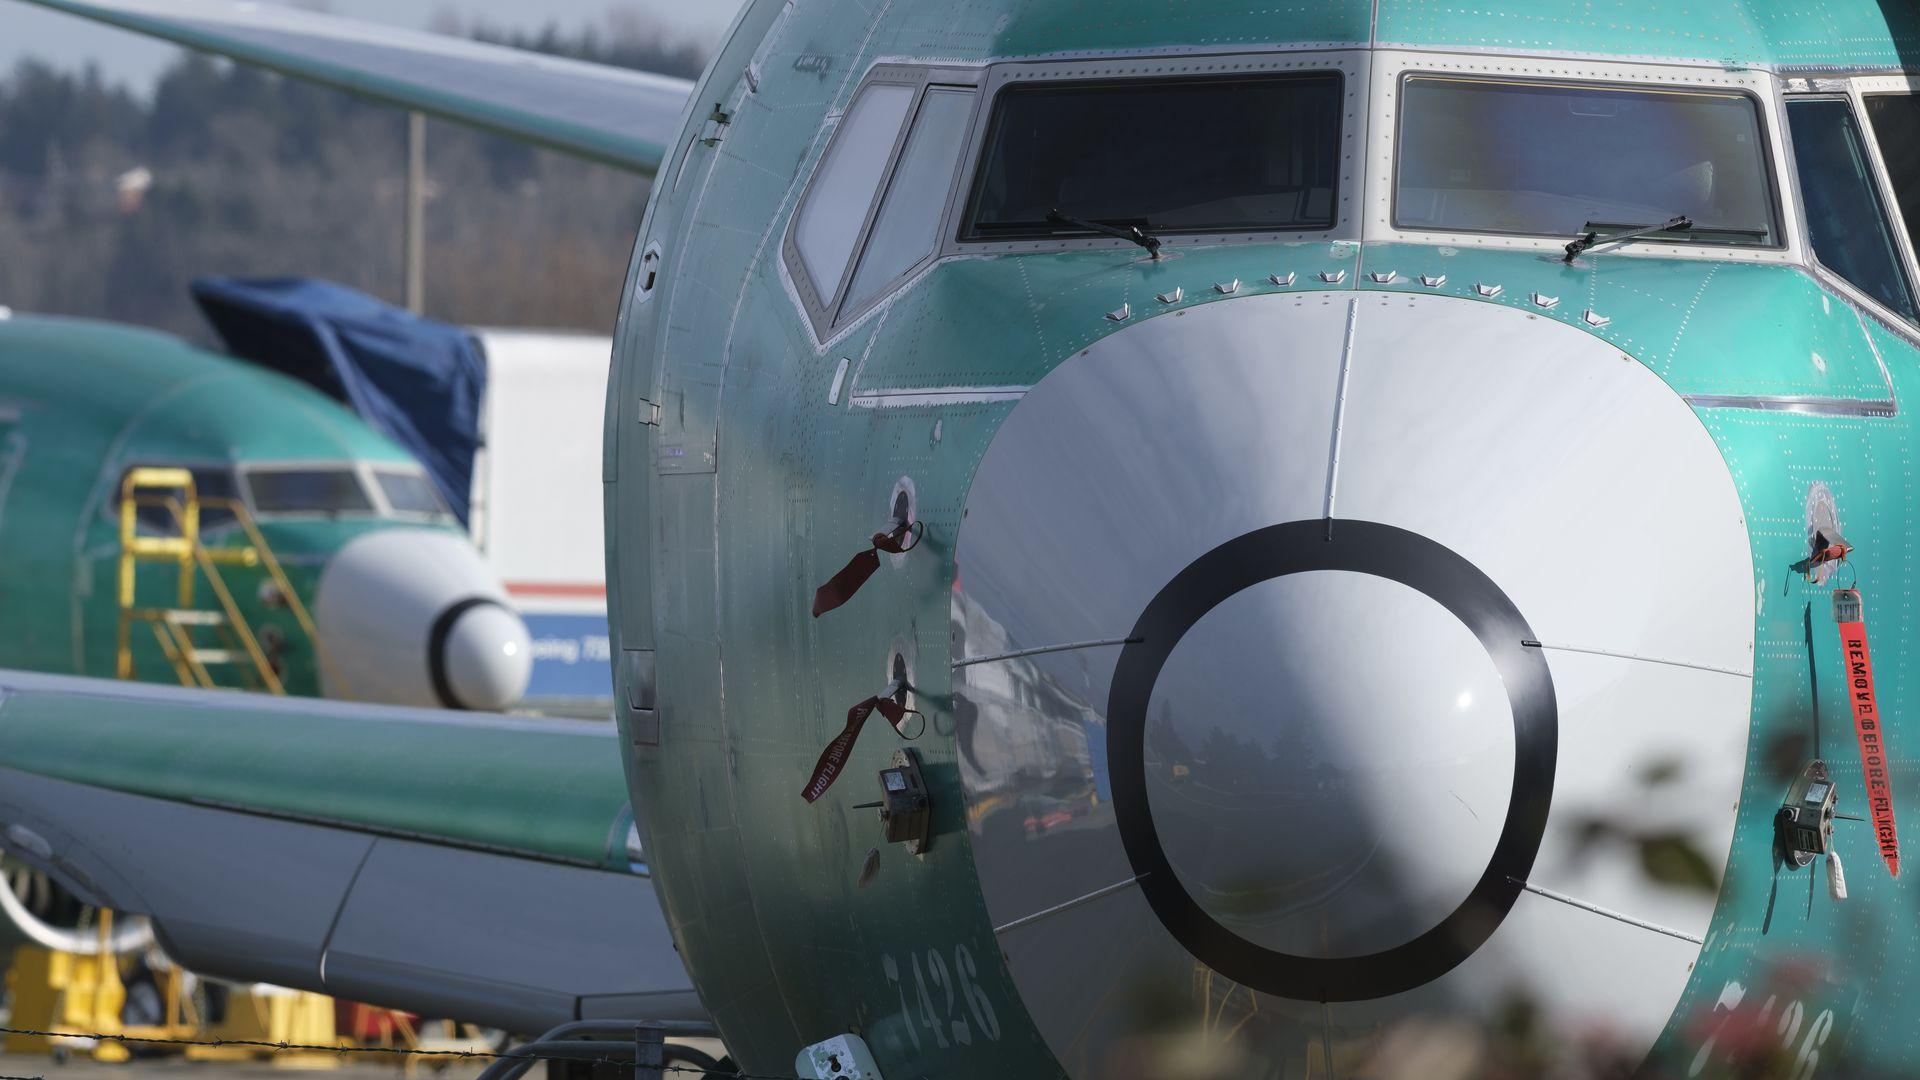 The Boeing 737 MAX crashes: Everything you need to know